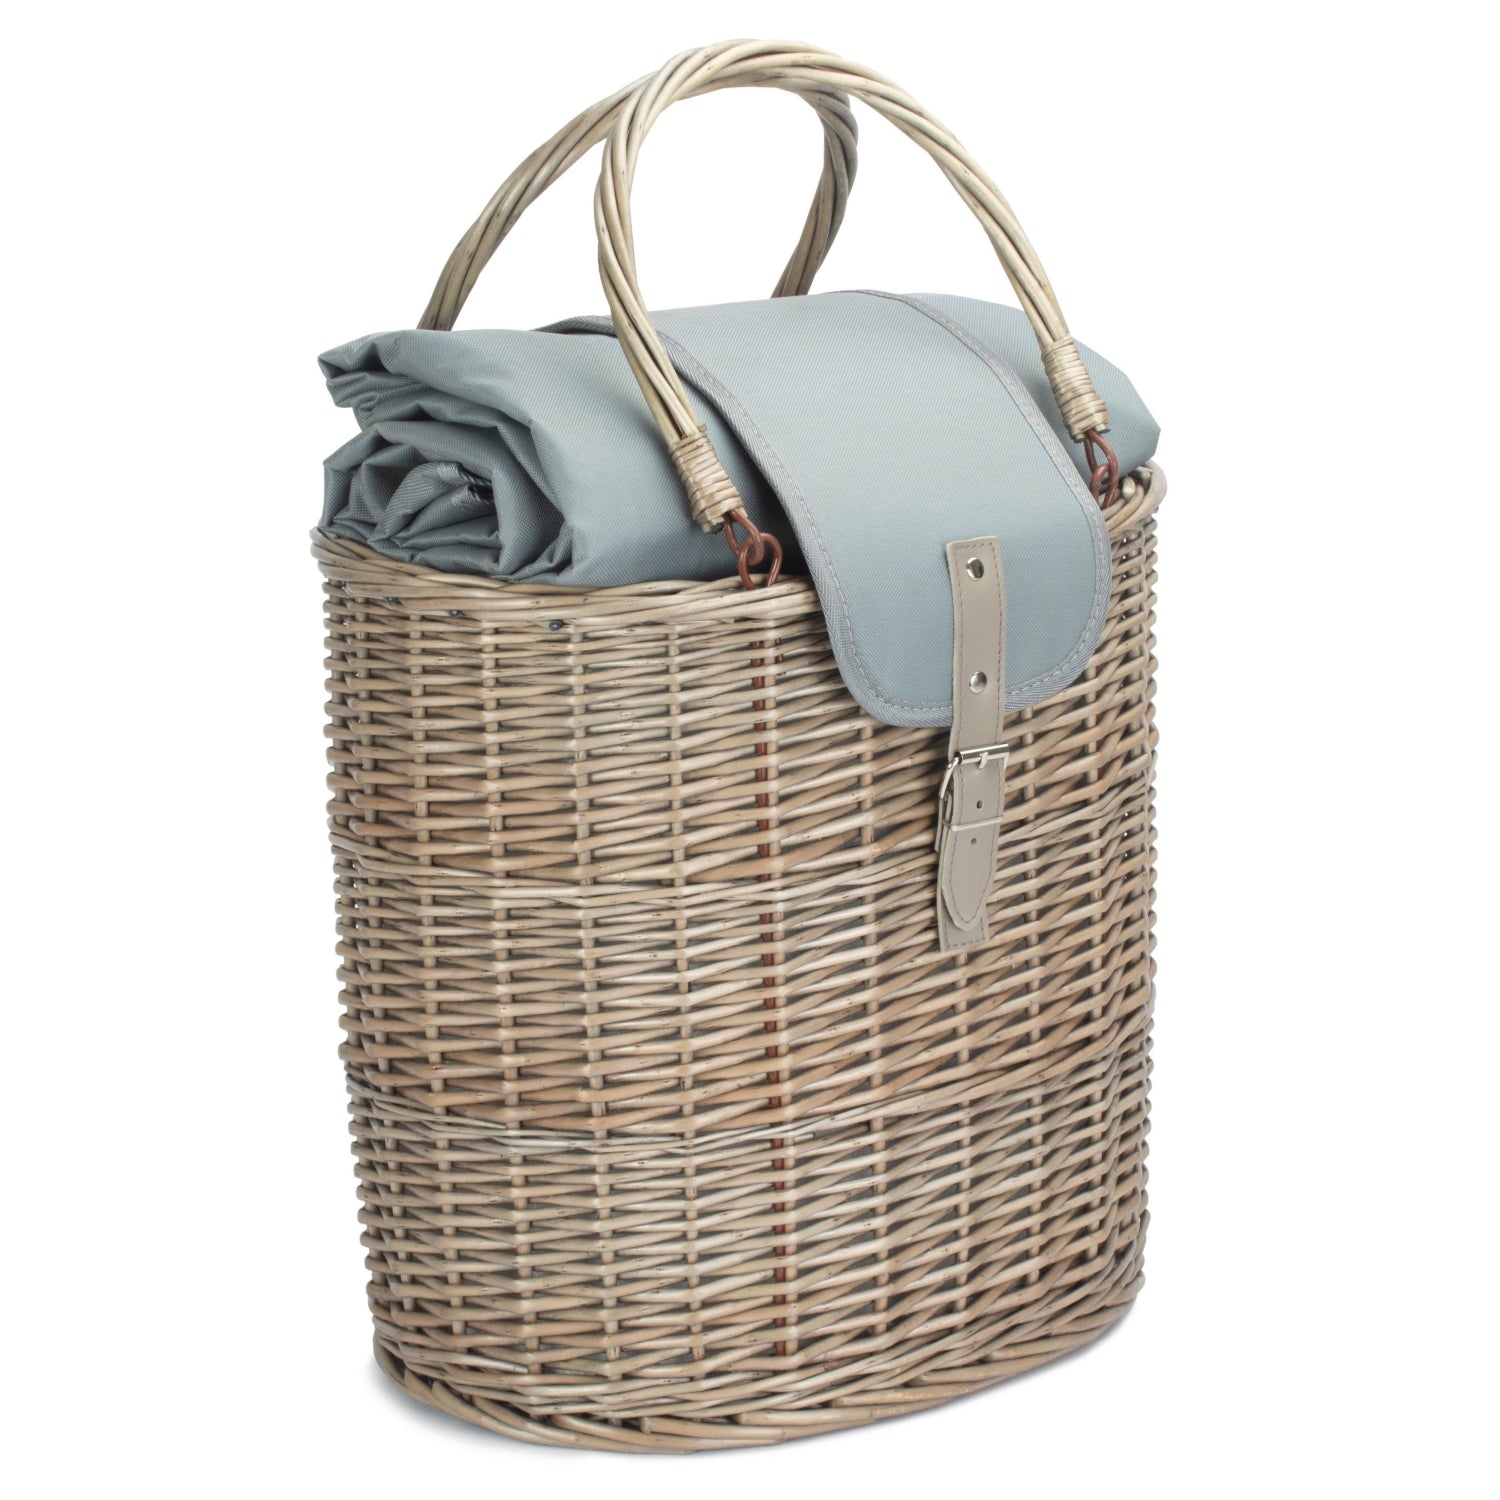 Red Hamper Oval Fitted Cool Bag Drinks Picnic Wicker Basket